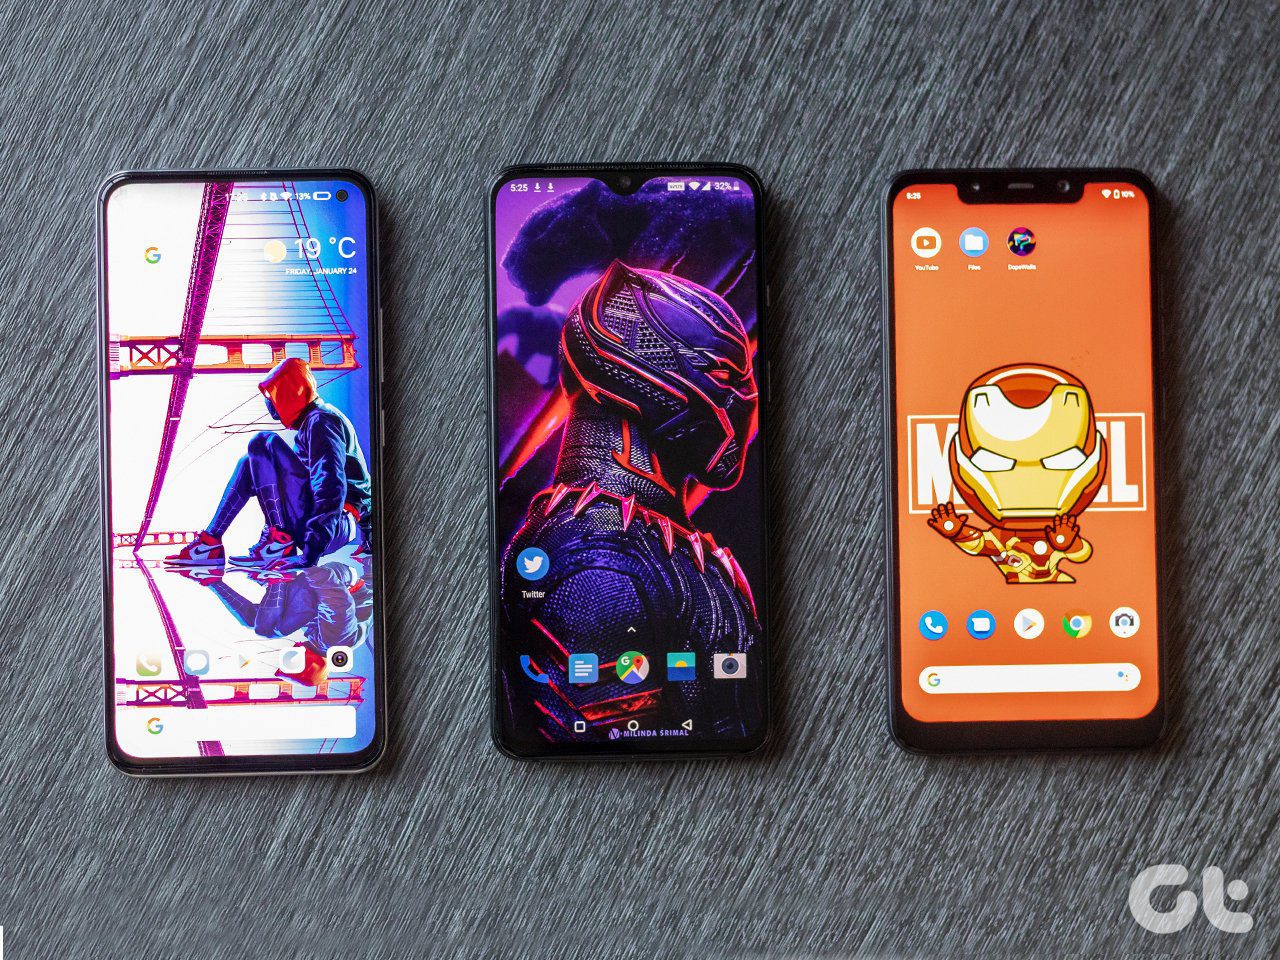 Top Best Wallpaper Android Apps in 2020